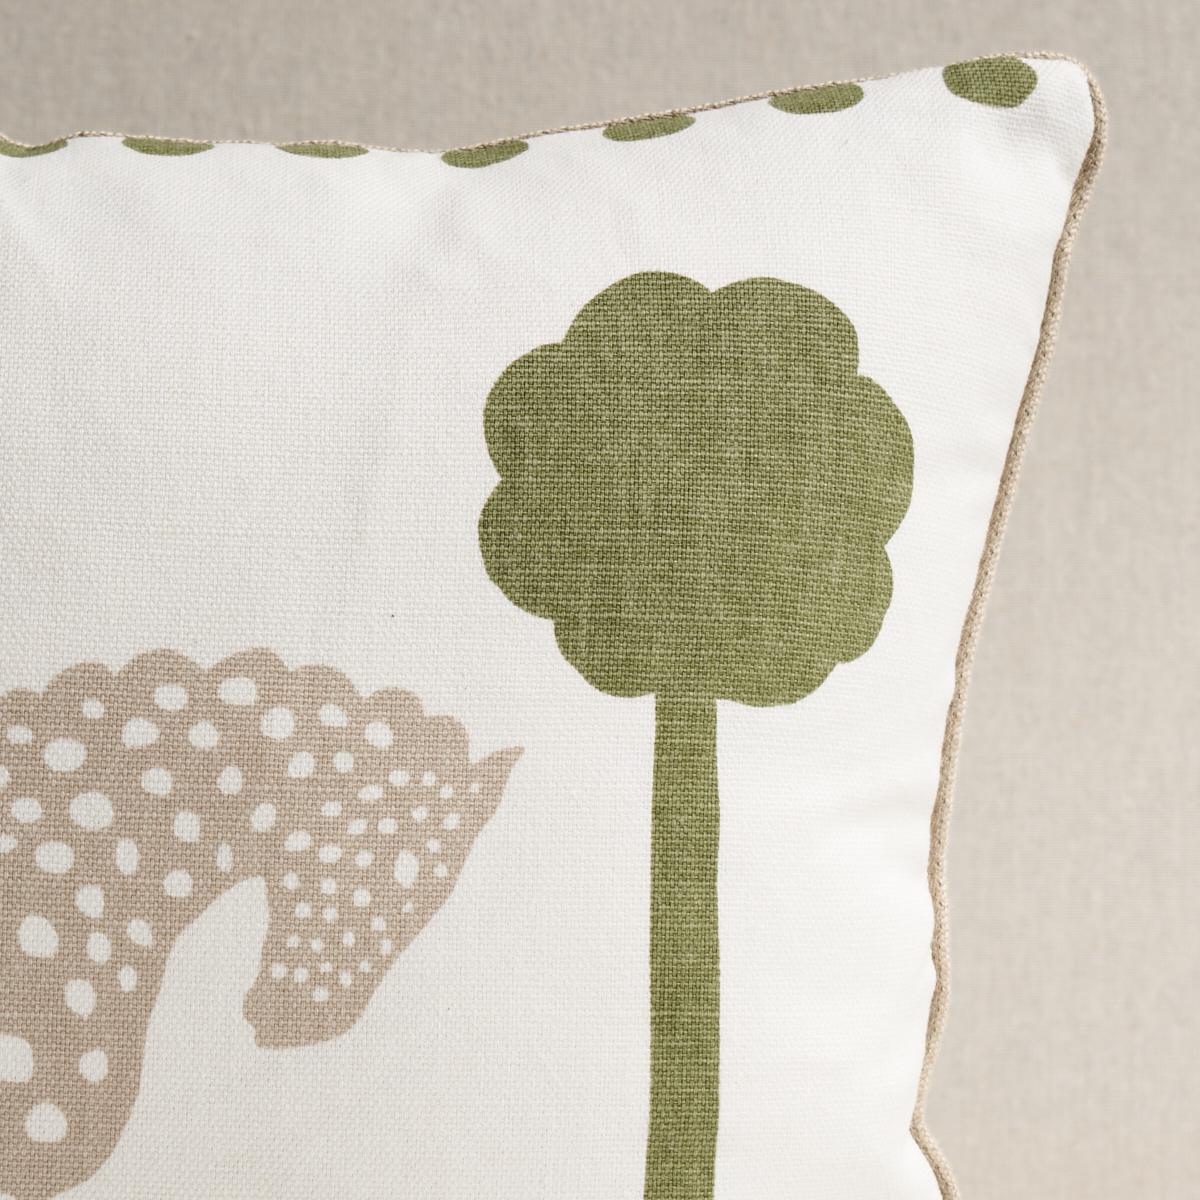 This pillow features Polka Dot Pony. Inspired by a midcentury pattern in our archive, Polka-Dot Pony in olive is a charming, whimsical design with modern appeal. Rows of stylized equine silhouettes create a large-scale stripe effect with the graphic